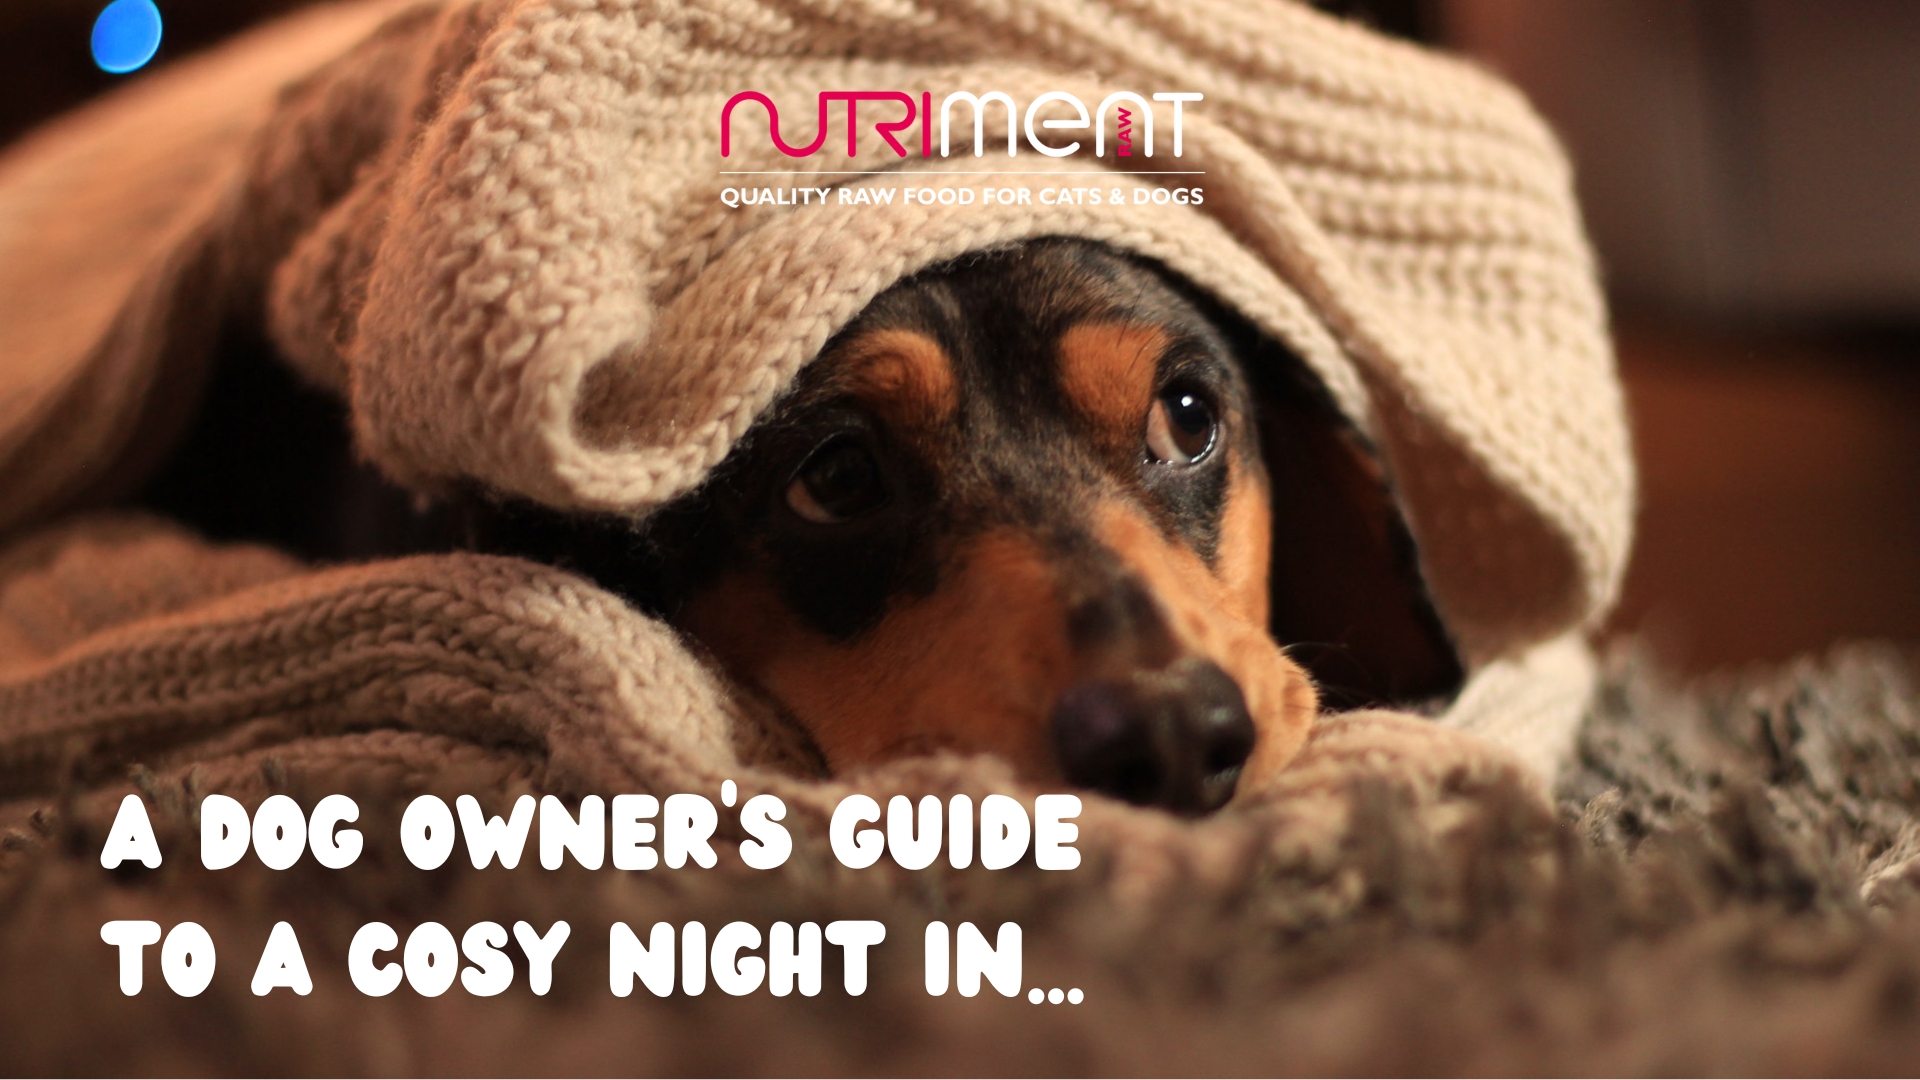 A dog owner's guide to a cosy night in...